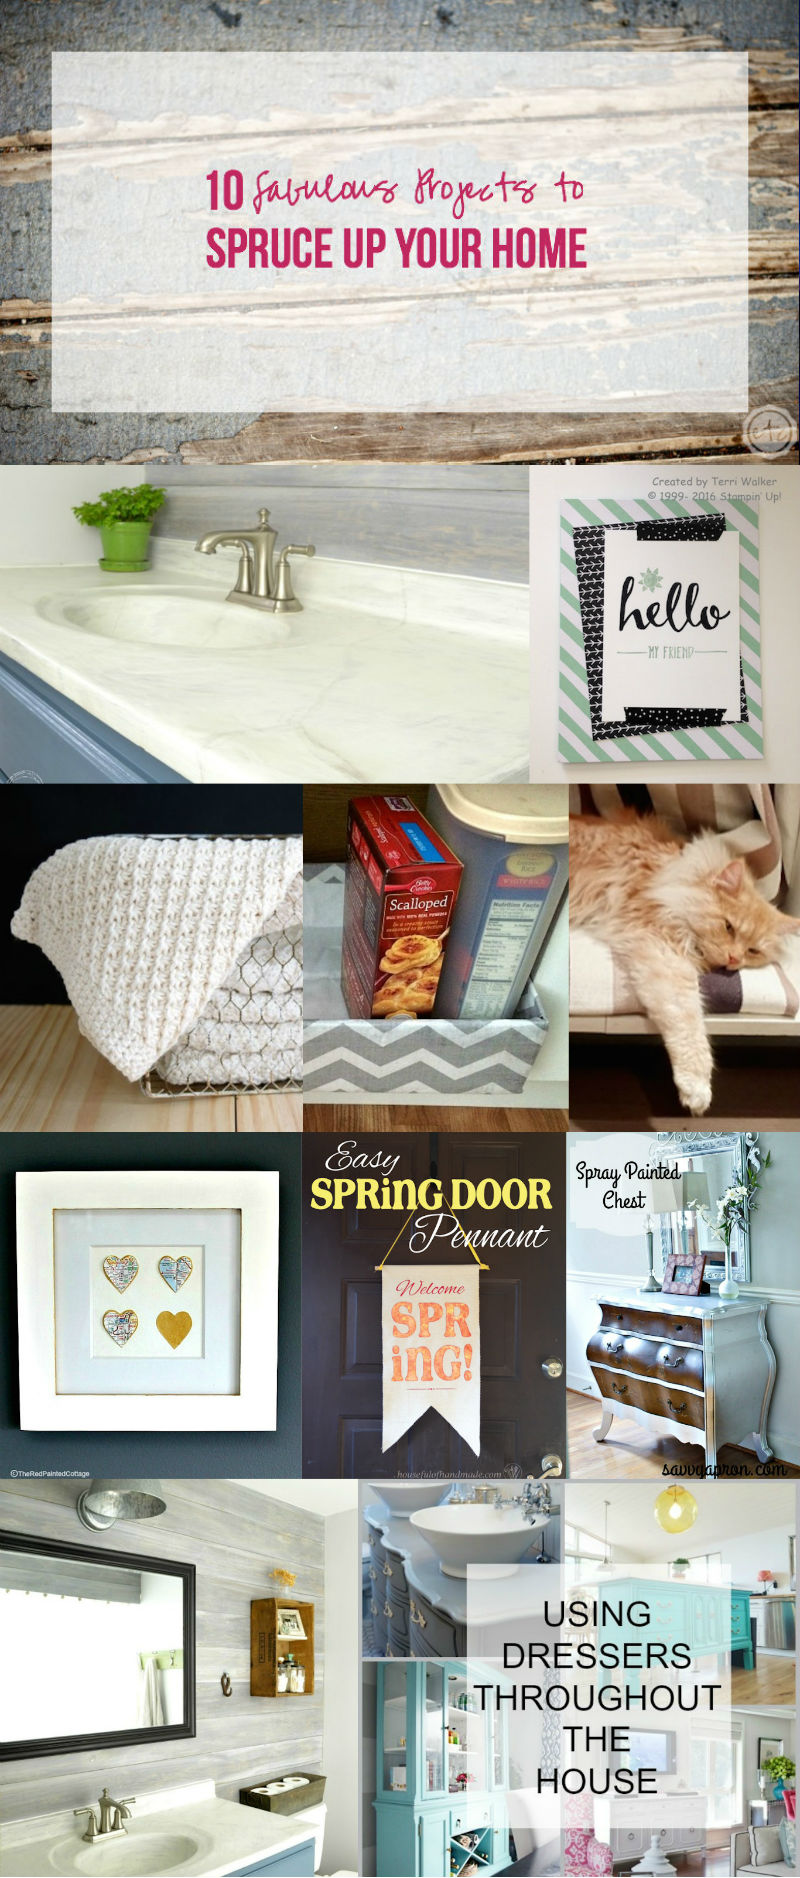 10 Fabulous Projects to Spruce Up Your Home with Happily Ever After, Etc.